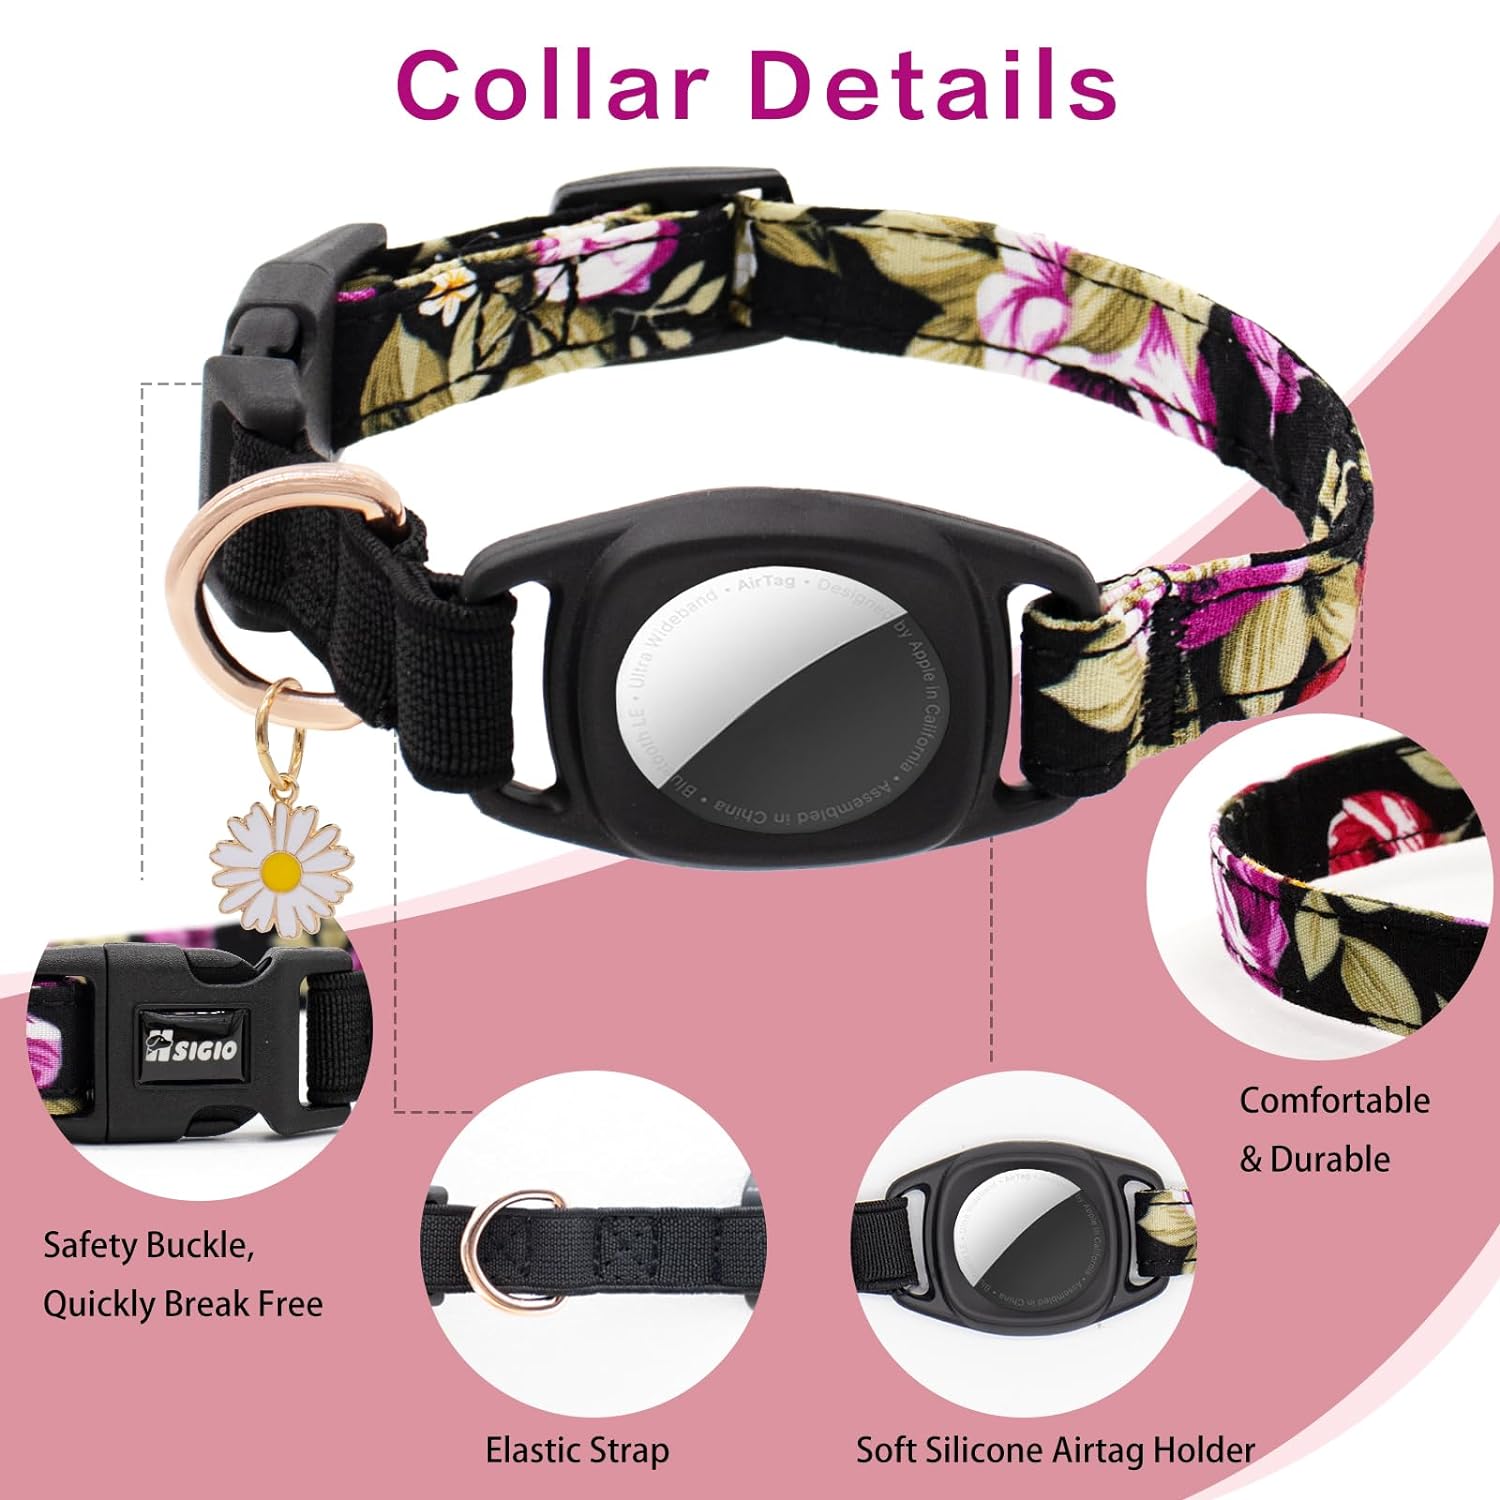 HSIGIO Airtag Cat Collar, GPS Cat Collar with Apple Air Tag Holder and Flower Charm, Floral Cat Tracker Collar in 0.6 Inches Width for Girl Boy Cats, Kittens and Puppies(Black Red Rose, 7.4-9inch)